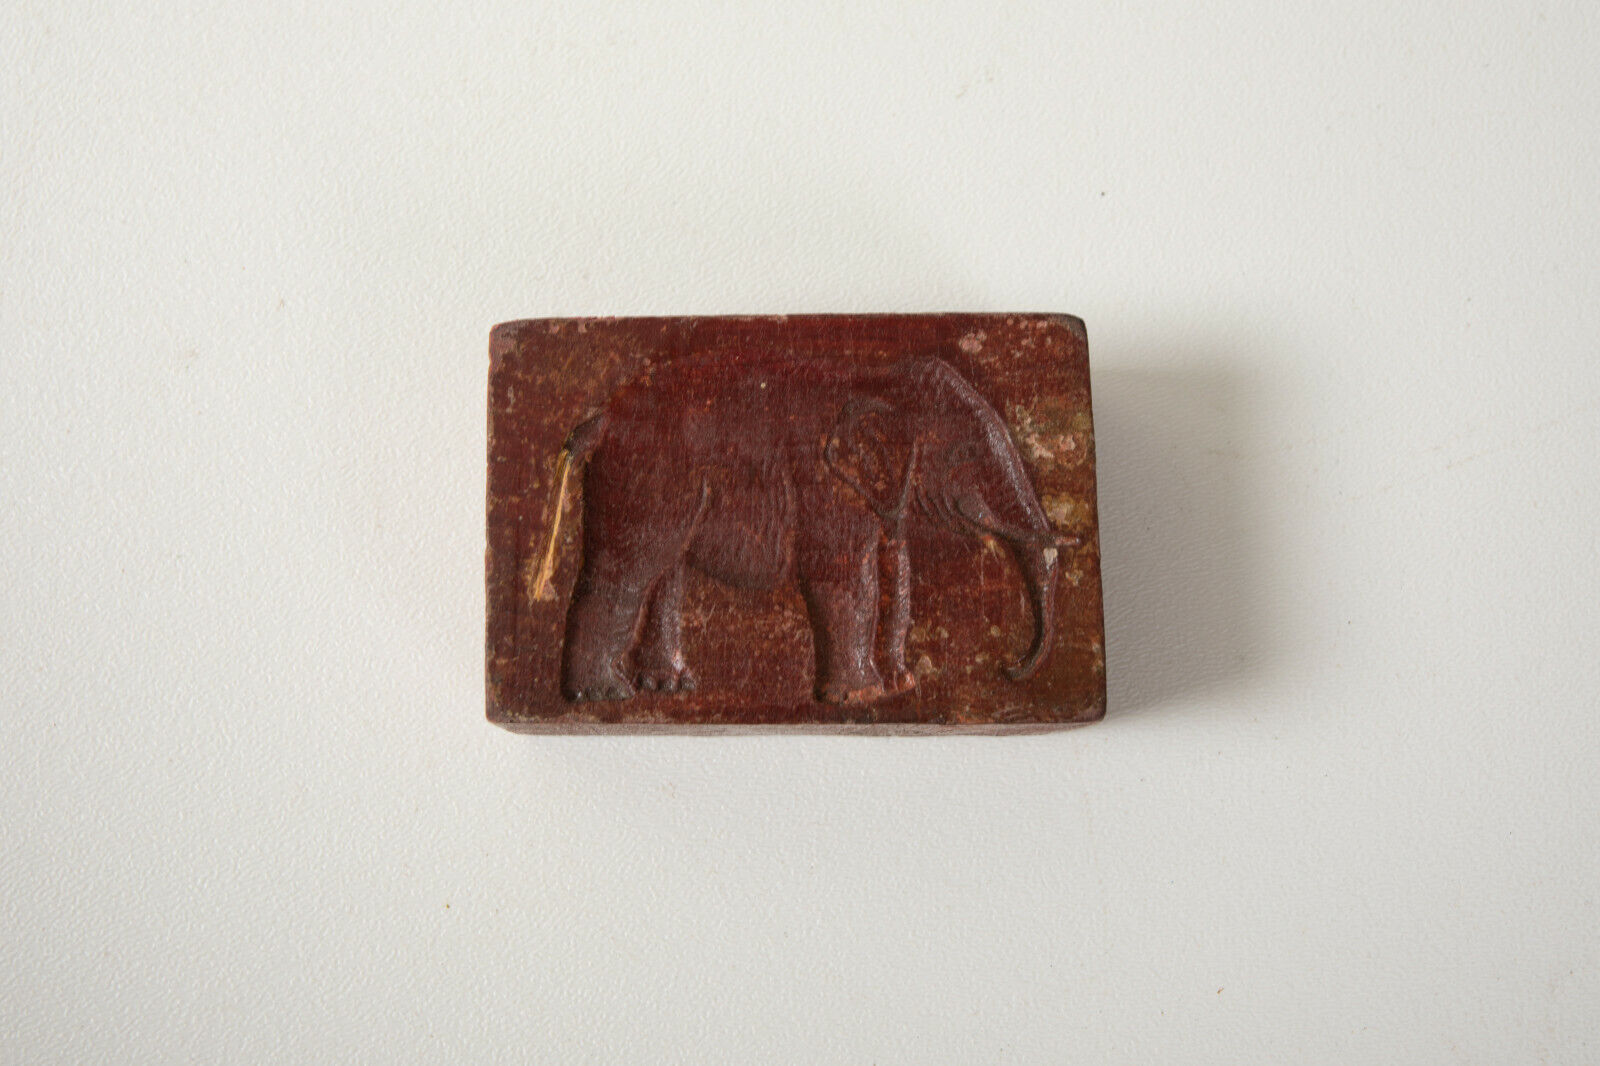 Two Sided Wood Block Stamp (R4D) Butter Mold (JSF6) Clay Elephant Rabbit